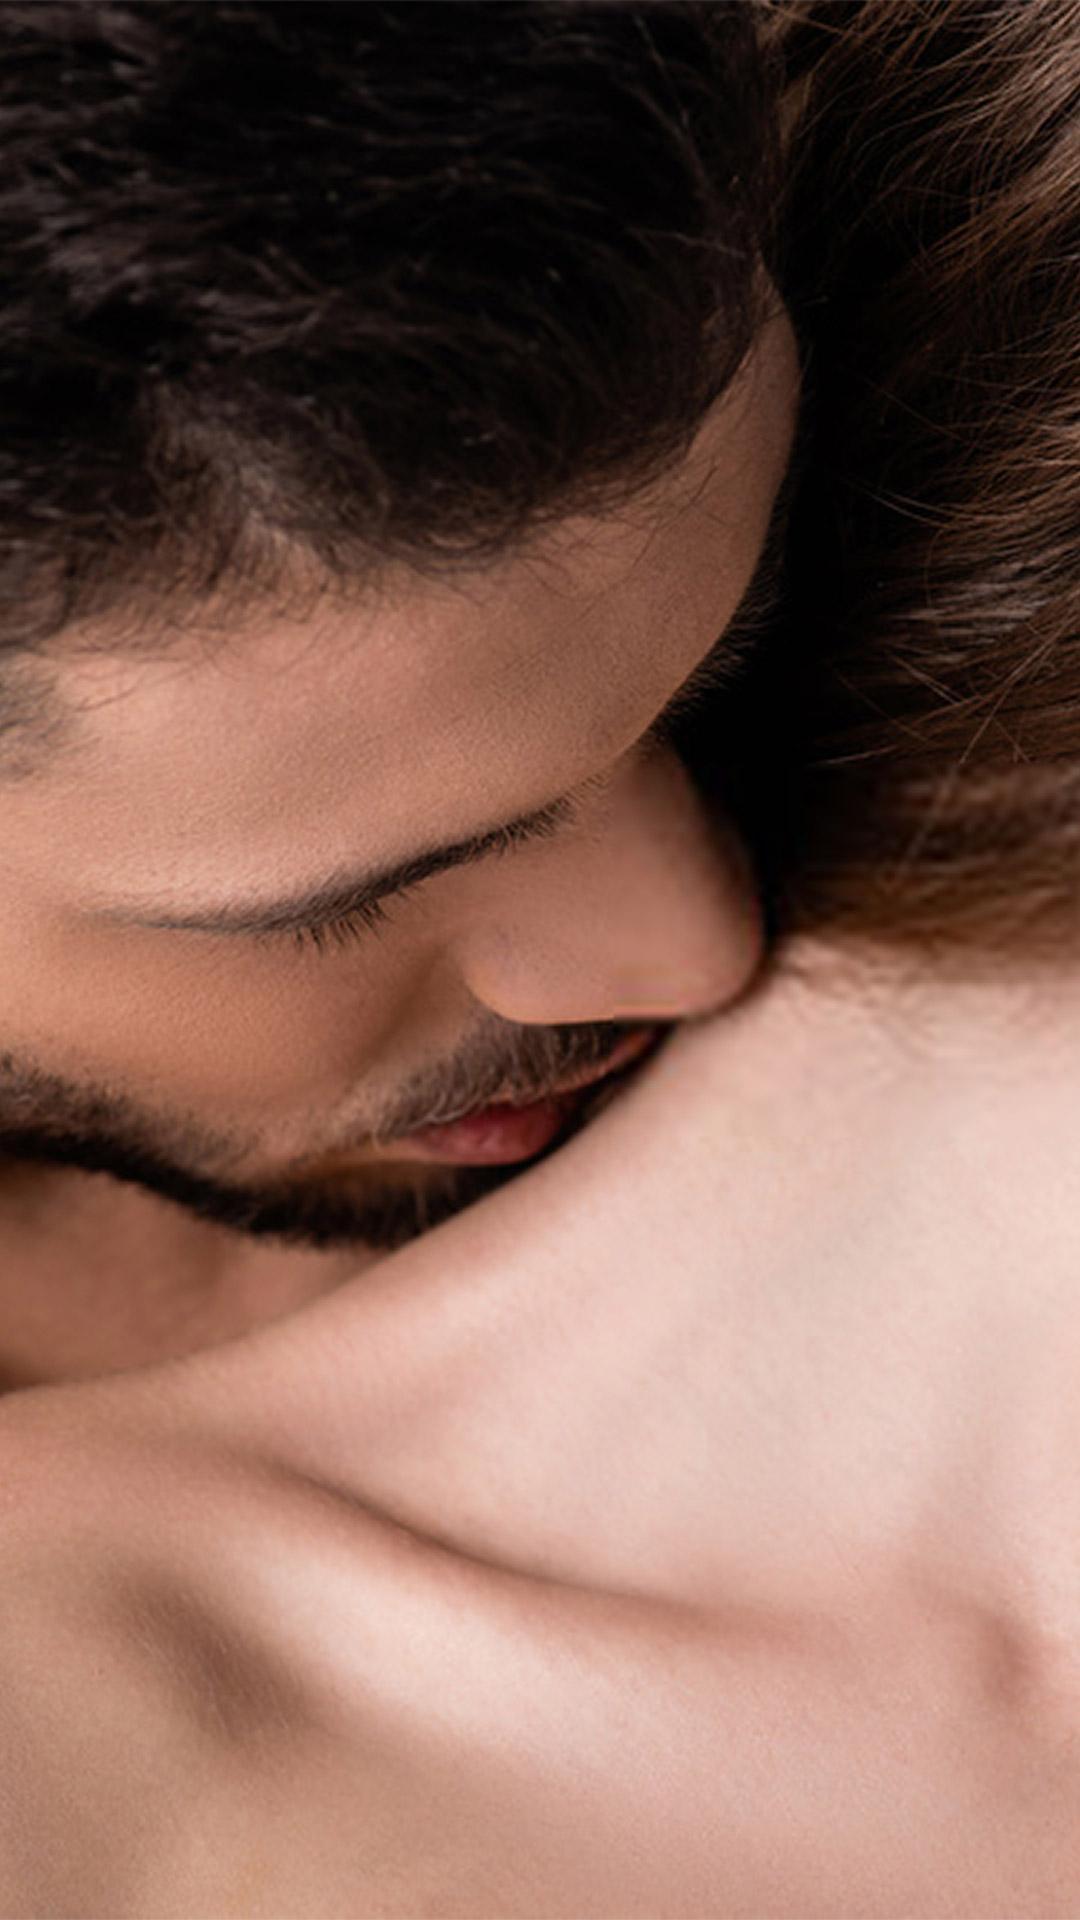 Amazing Kissing Tips & Tricks for Android - APK Download